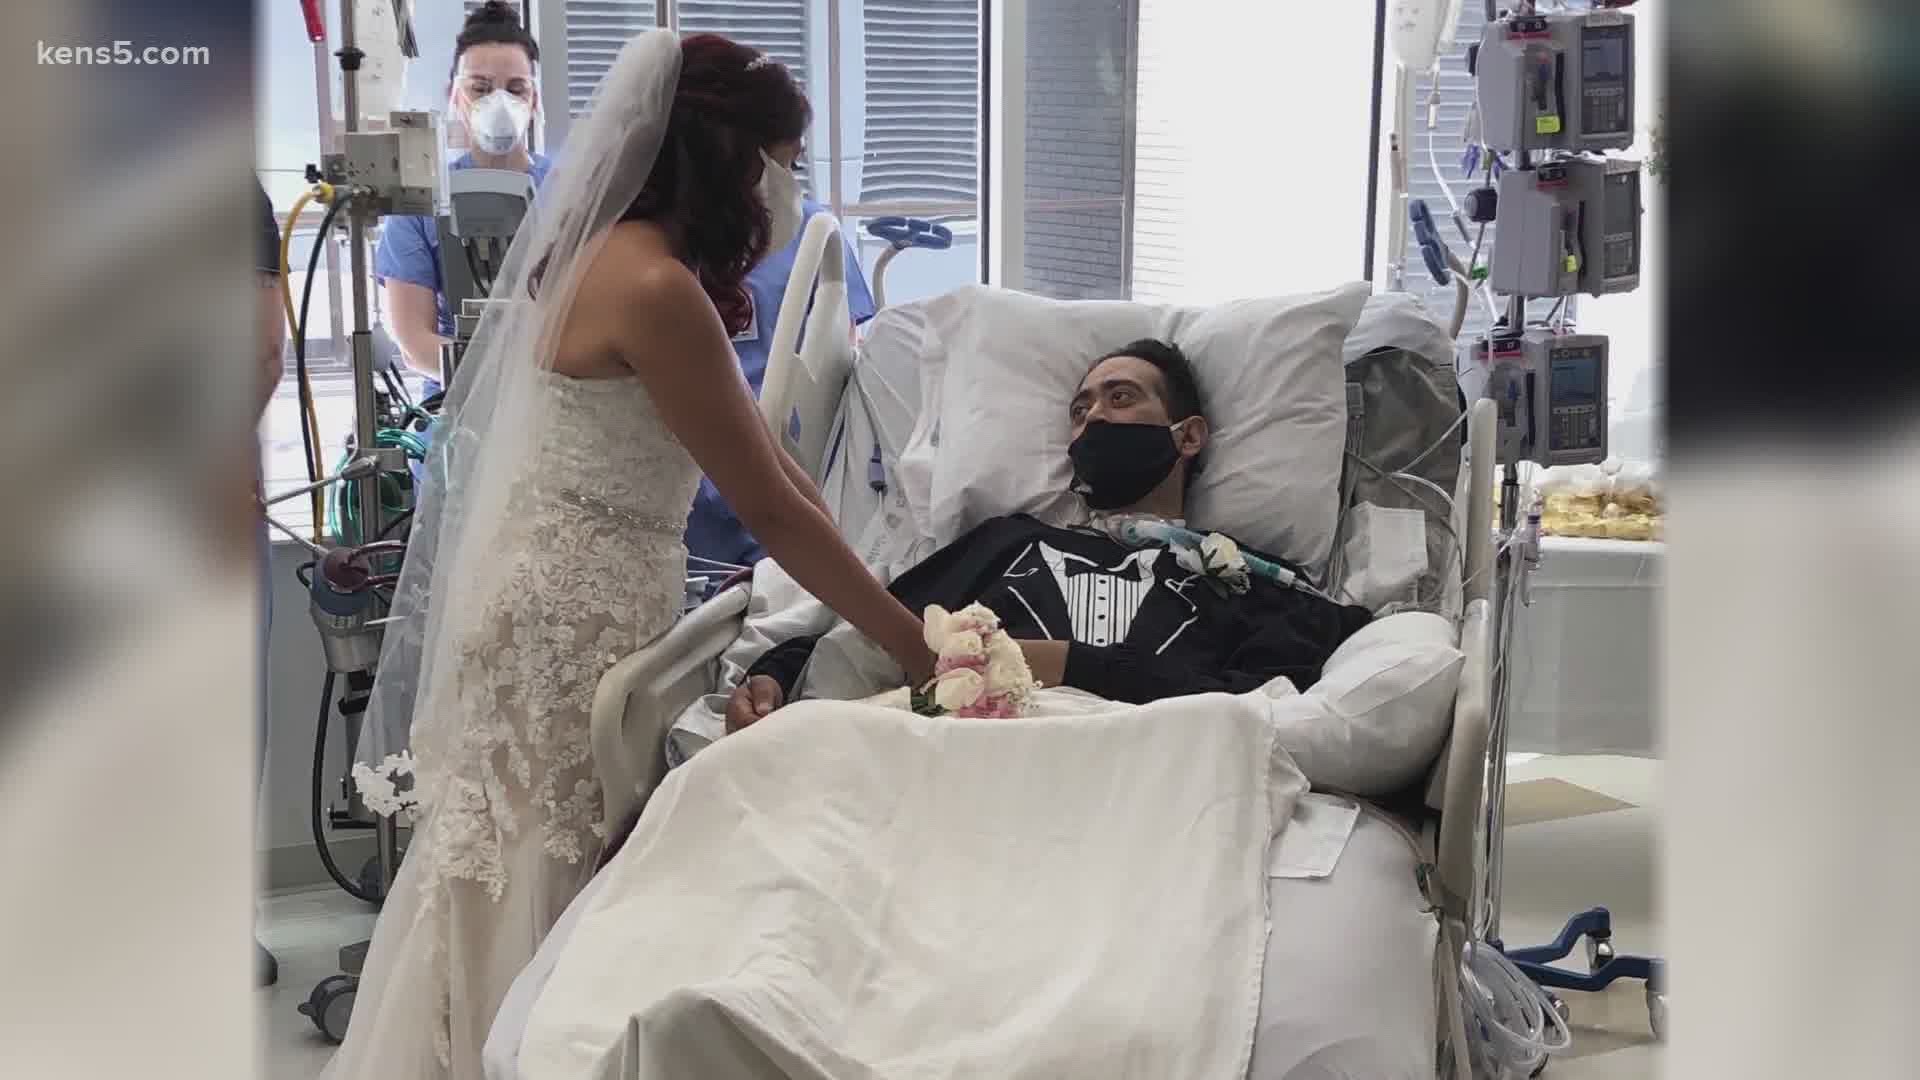 A San Antonio man struggling to recover from coronavirus was able to say “I do” to his fiancee with the help of Methodist Hospital staff.